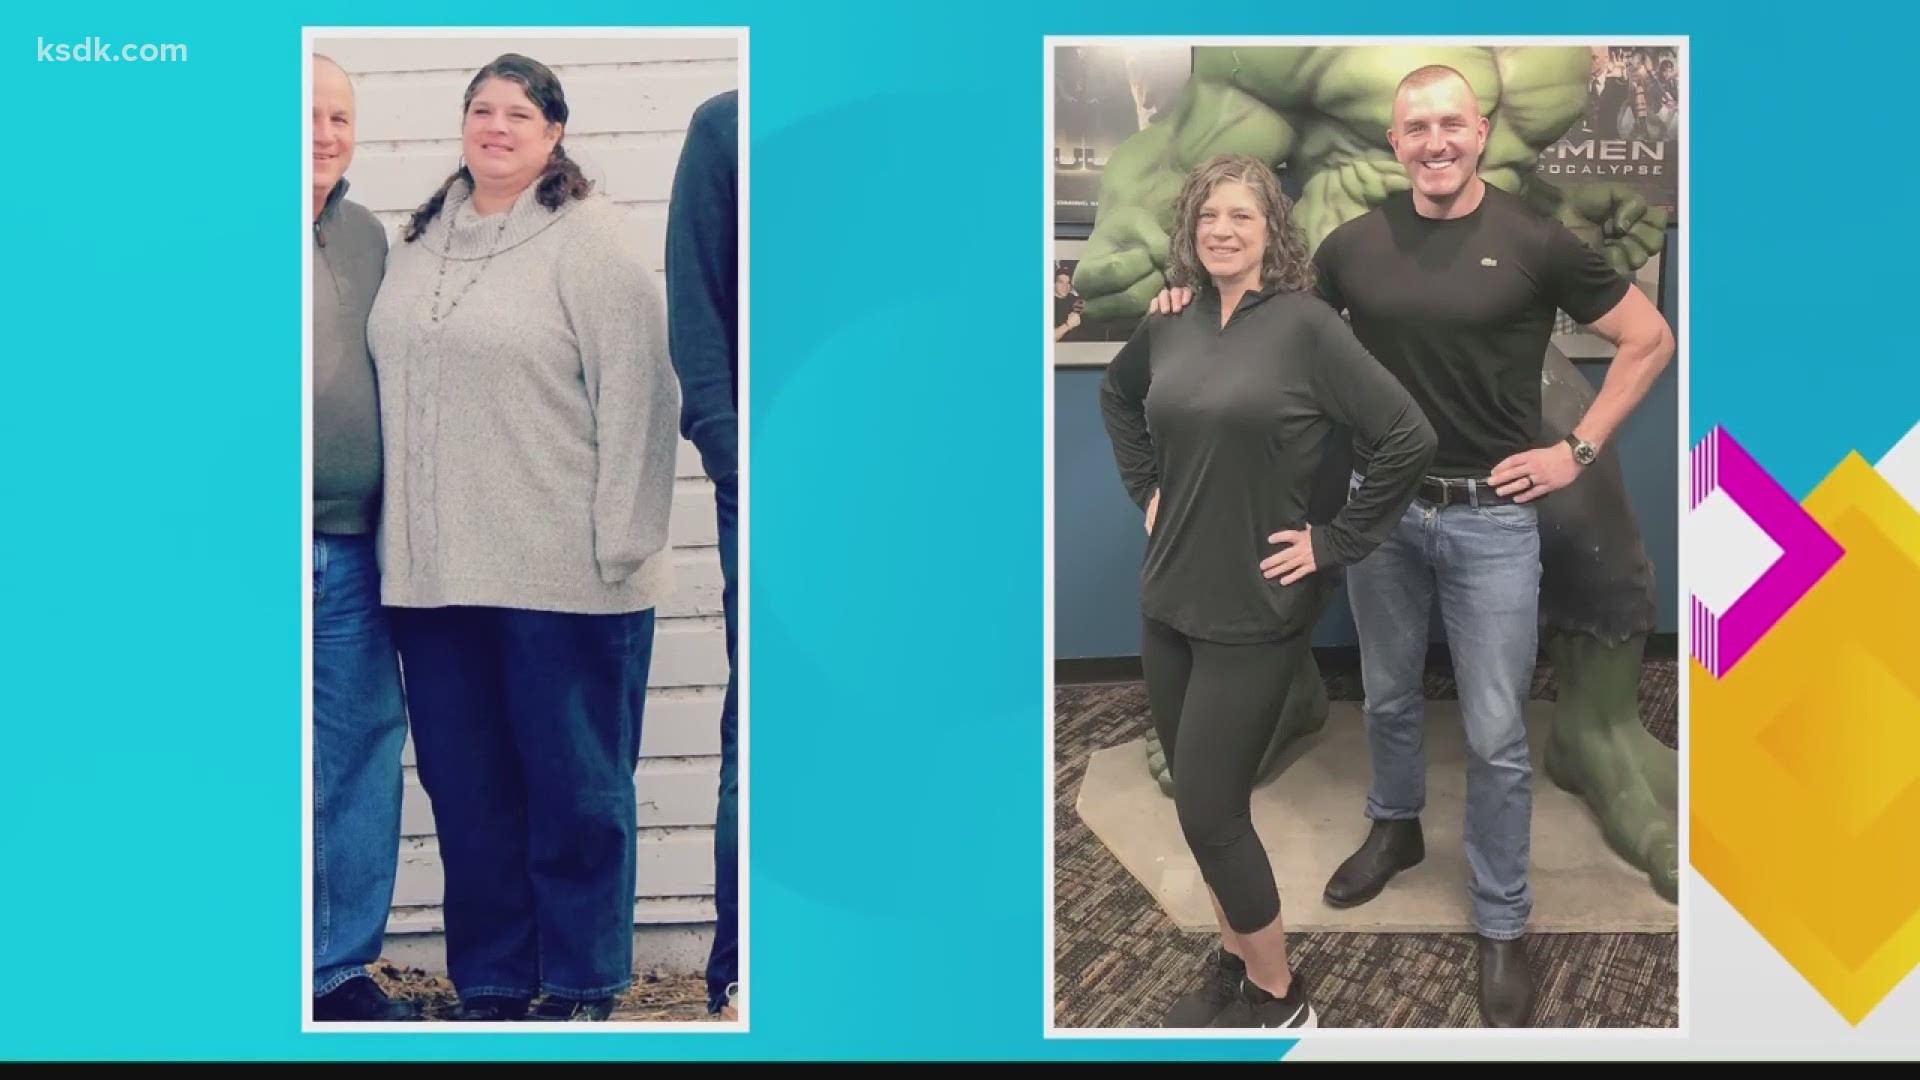 Lisa was able to lose 100 pounds on her own but needed Charles D’Angelo’s help to keep going past that number.